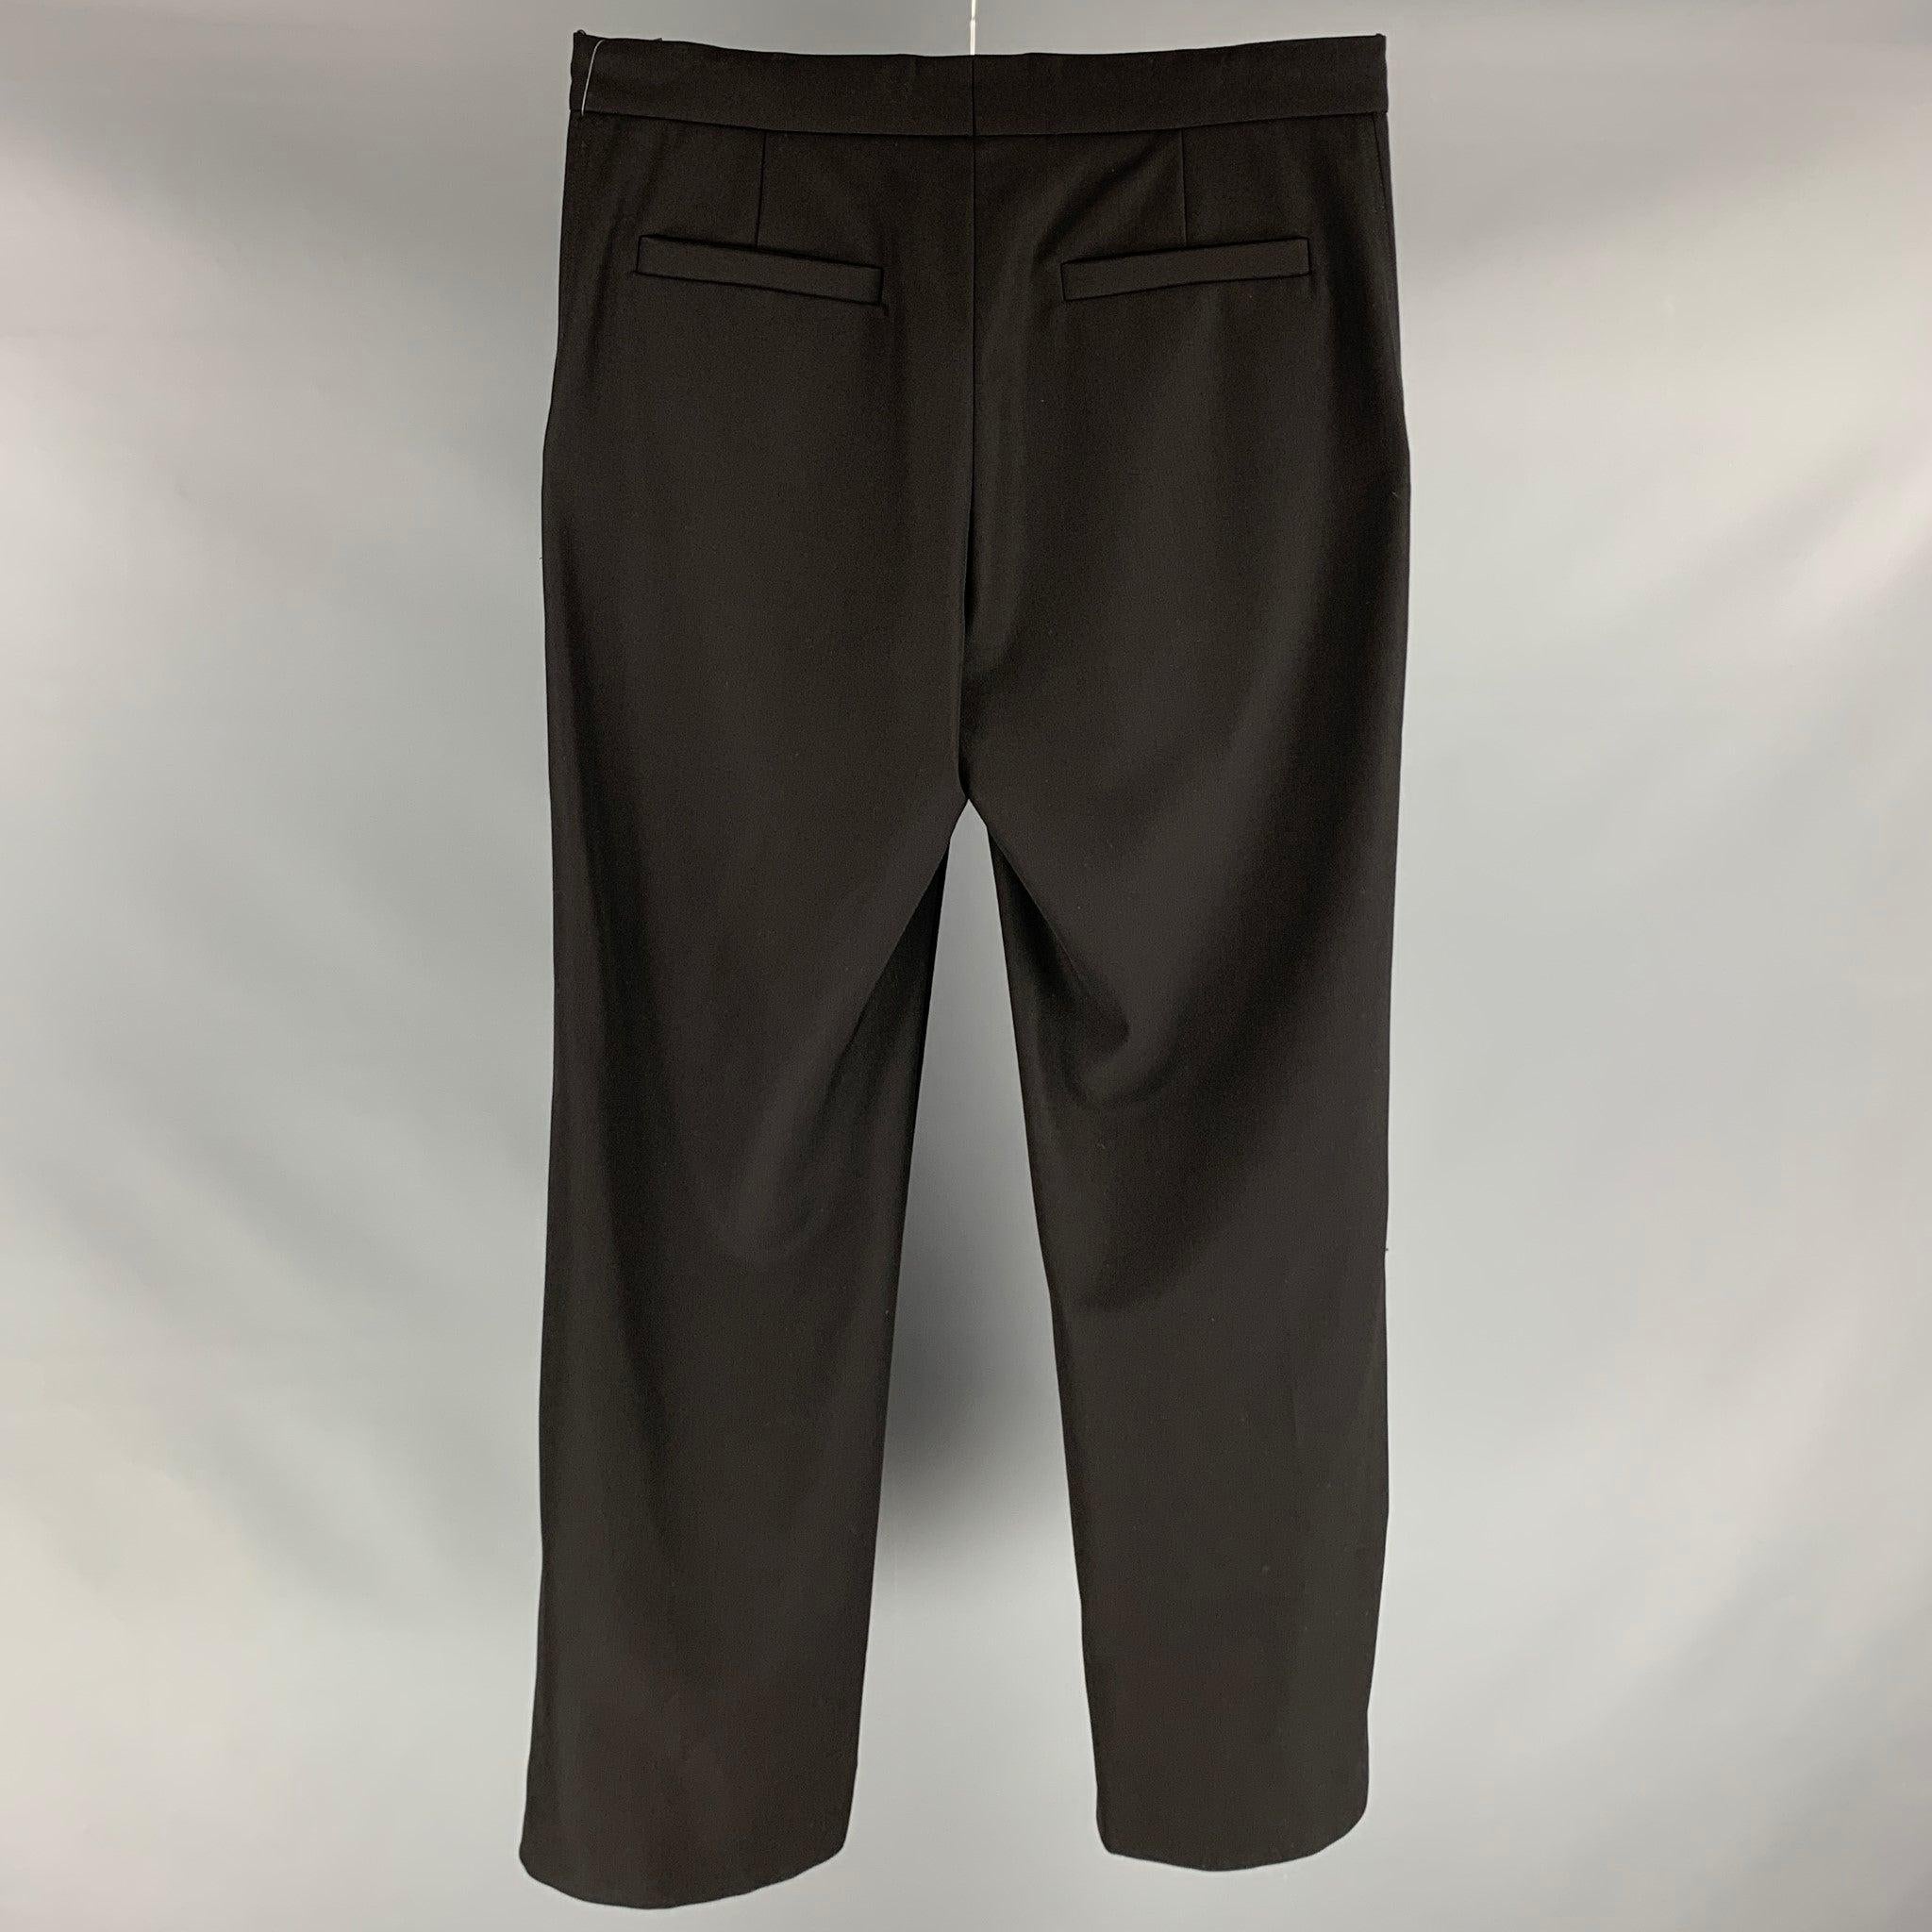 LOUIS VUITTON dress pants comes in a black polyester and wool material featuring a flat front, 3 pockets at front, logo applique detail right leg, medium waist style, front tab, and a zip fly closure. Made in Italy. Excellent Pre-Owned Condition.